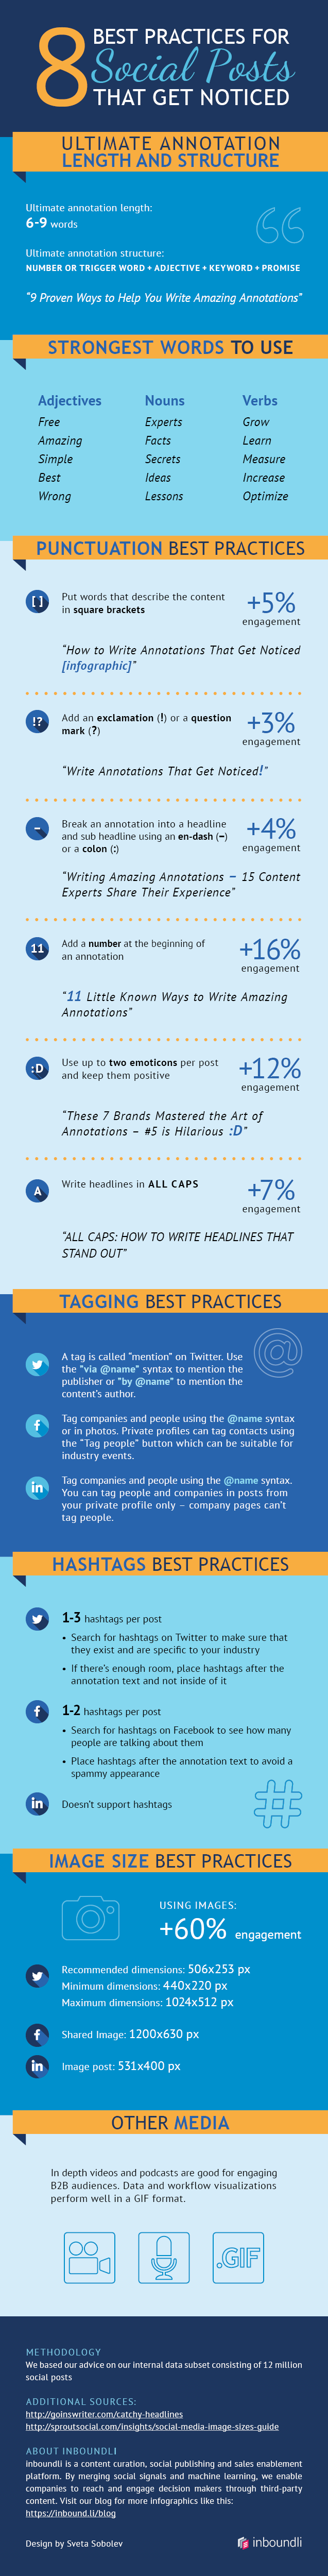 8 Best Practices for Social Posts That Get Noticed [Infographic] - An infographic describing how to optimize social media posts for maximum reach and engagement